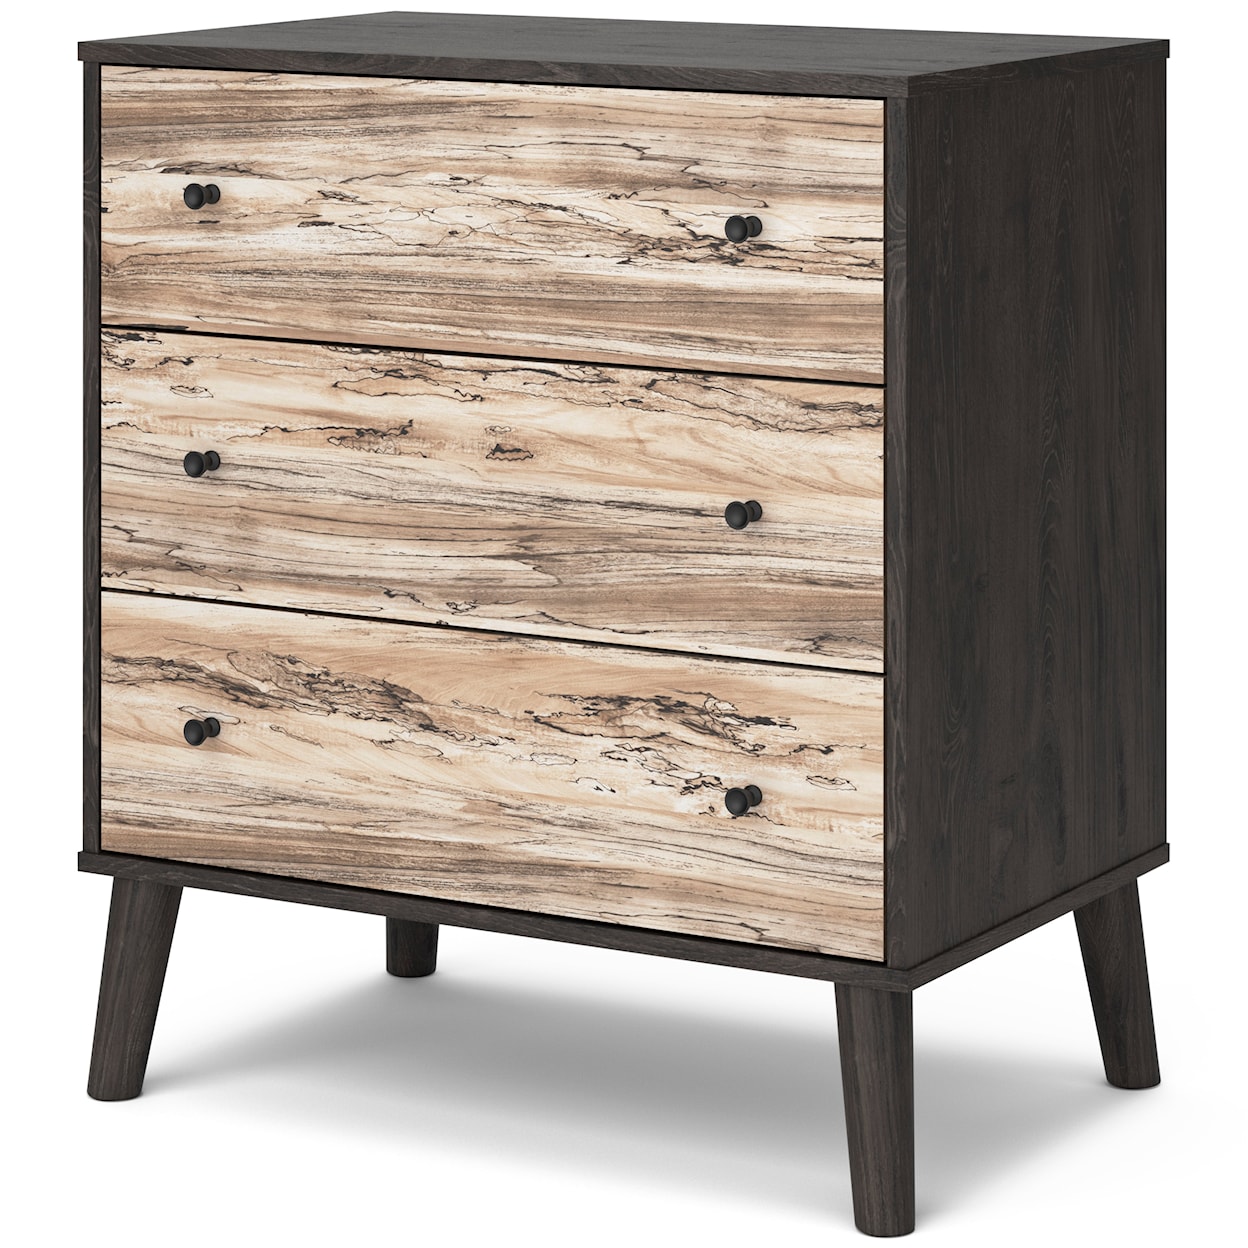 Signature Design by Ashley Furniture Lannover Chest of Drawers